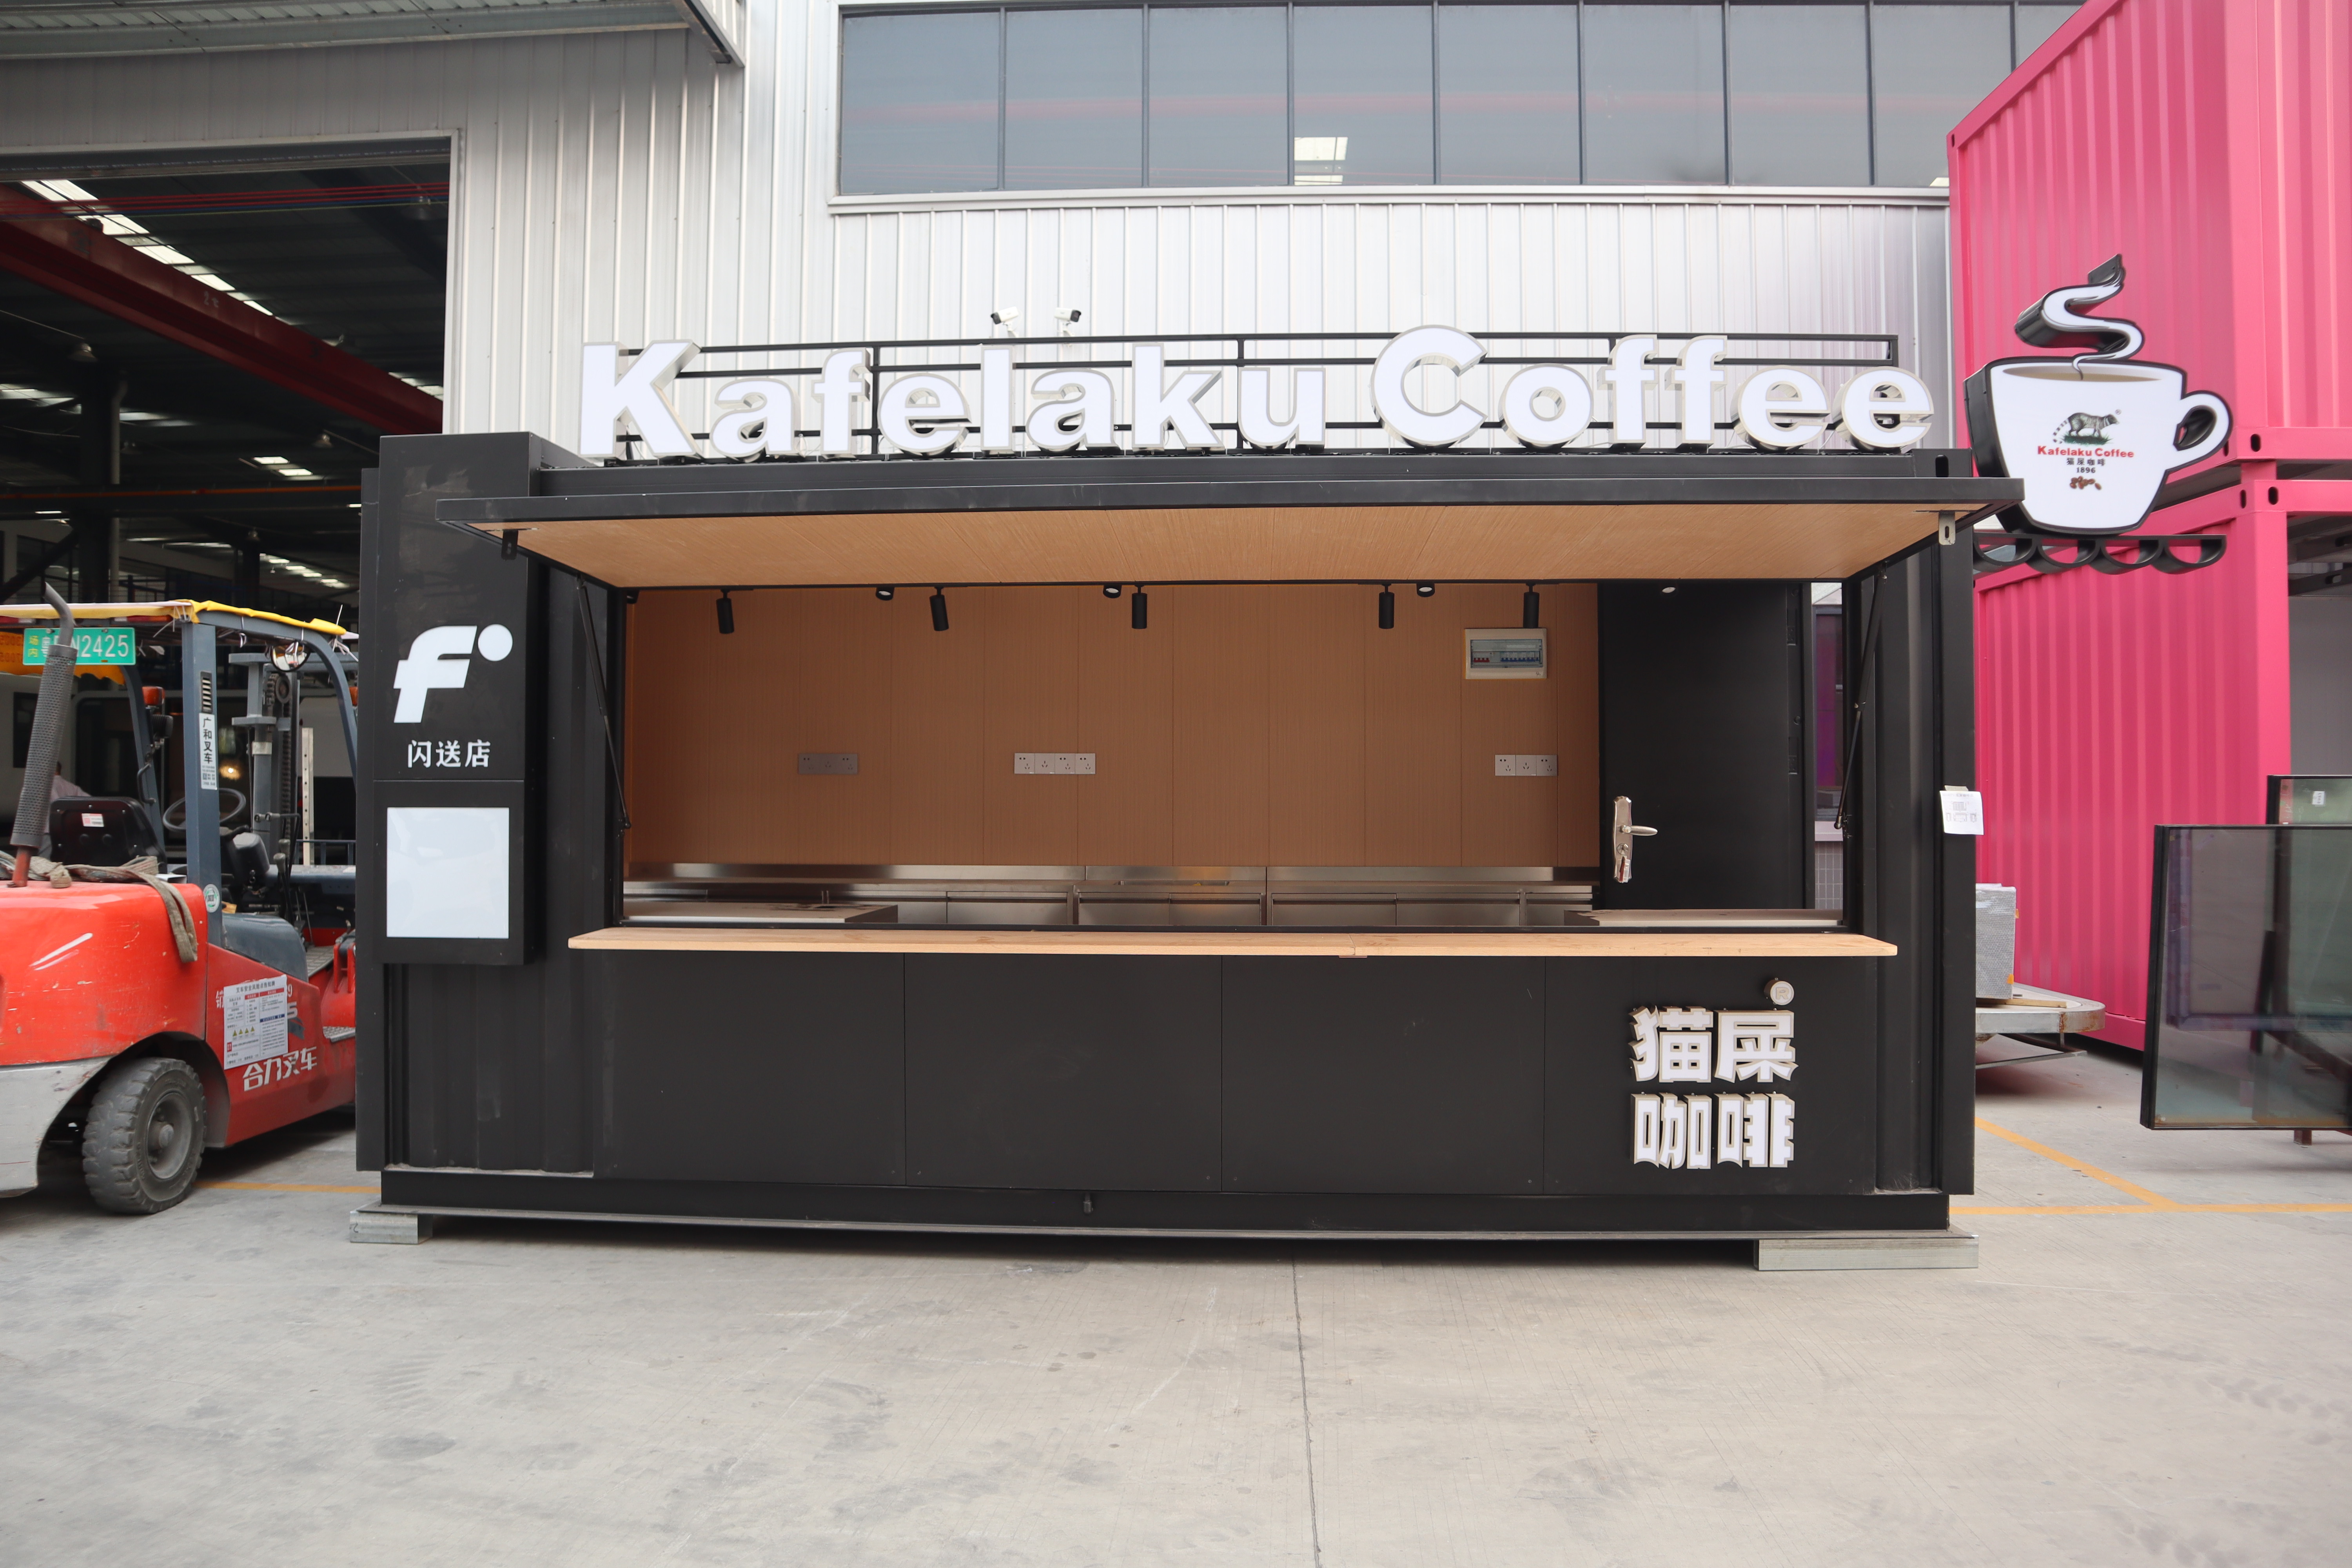 Shipping Container Coffee Shop in Japan